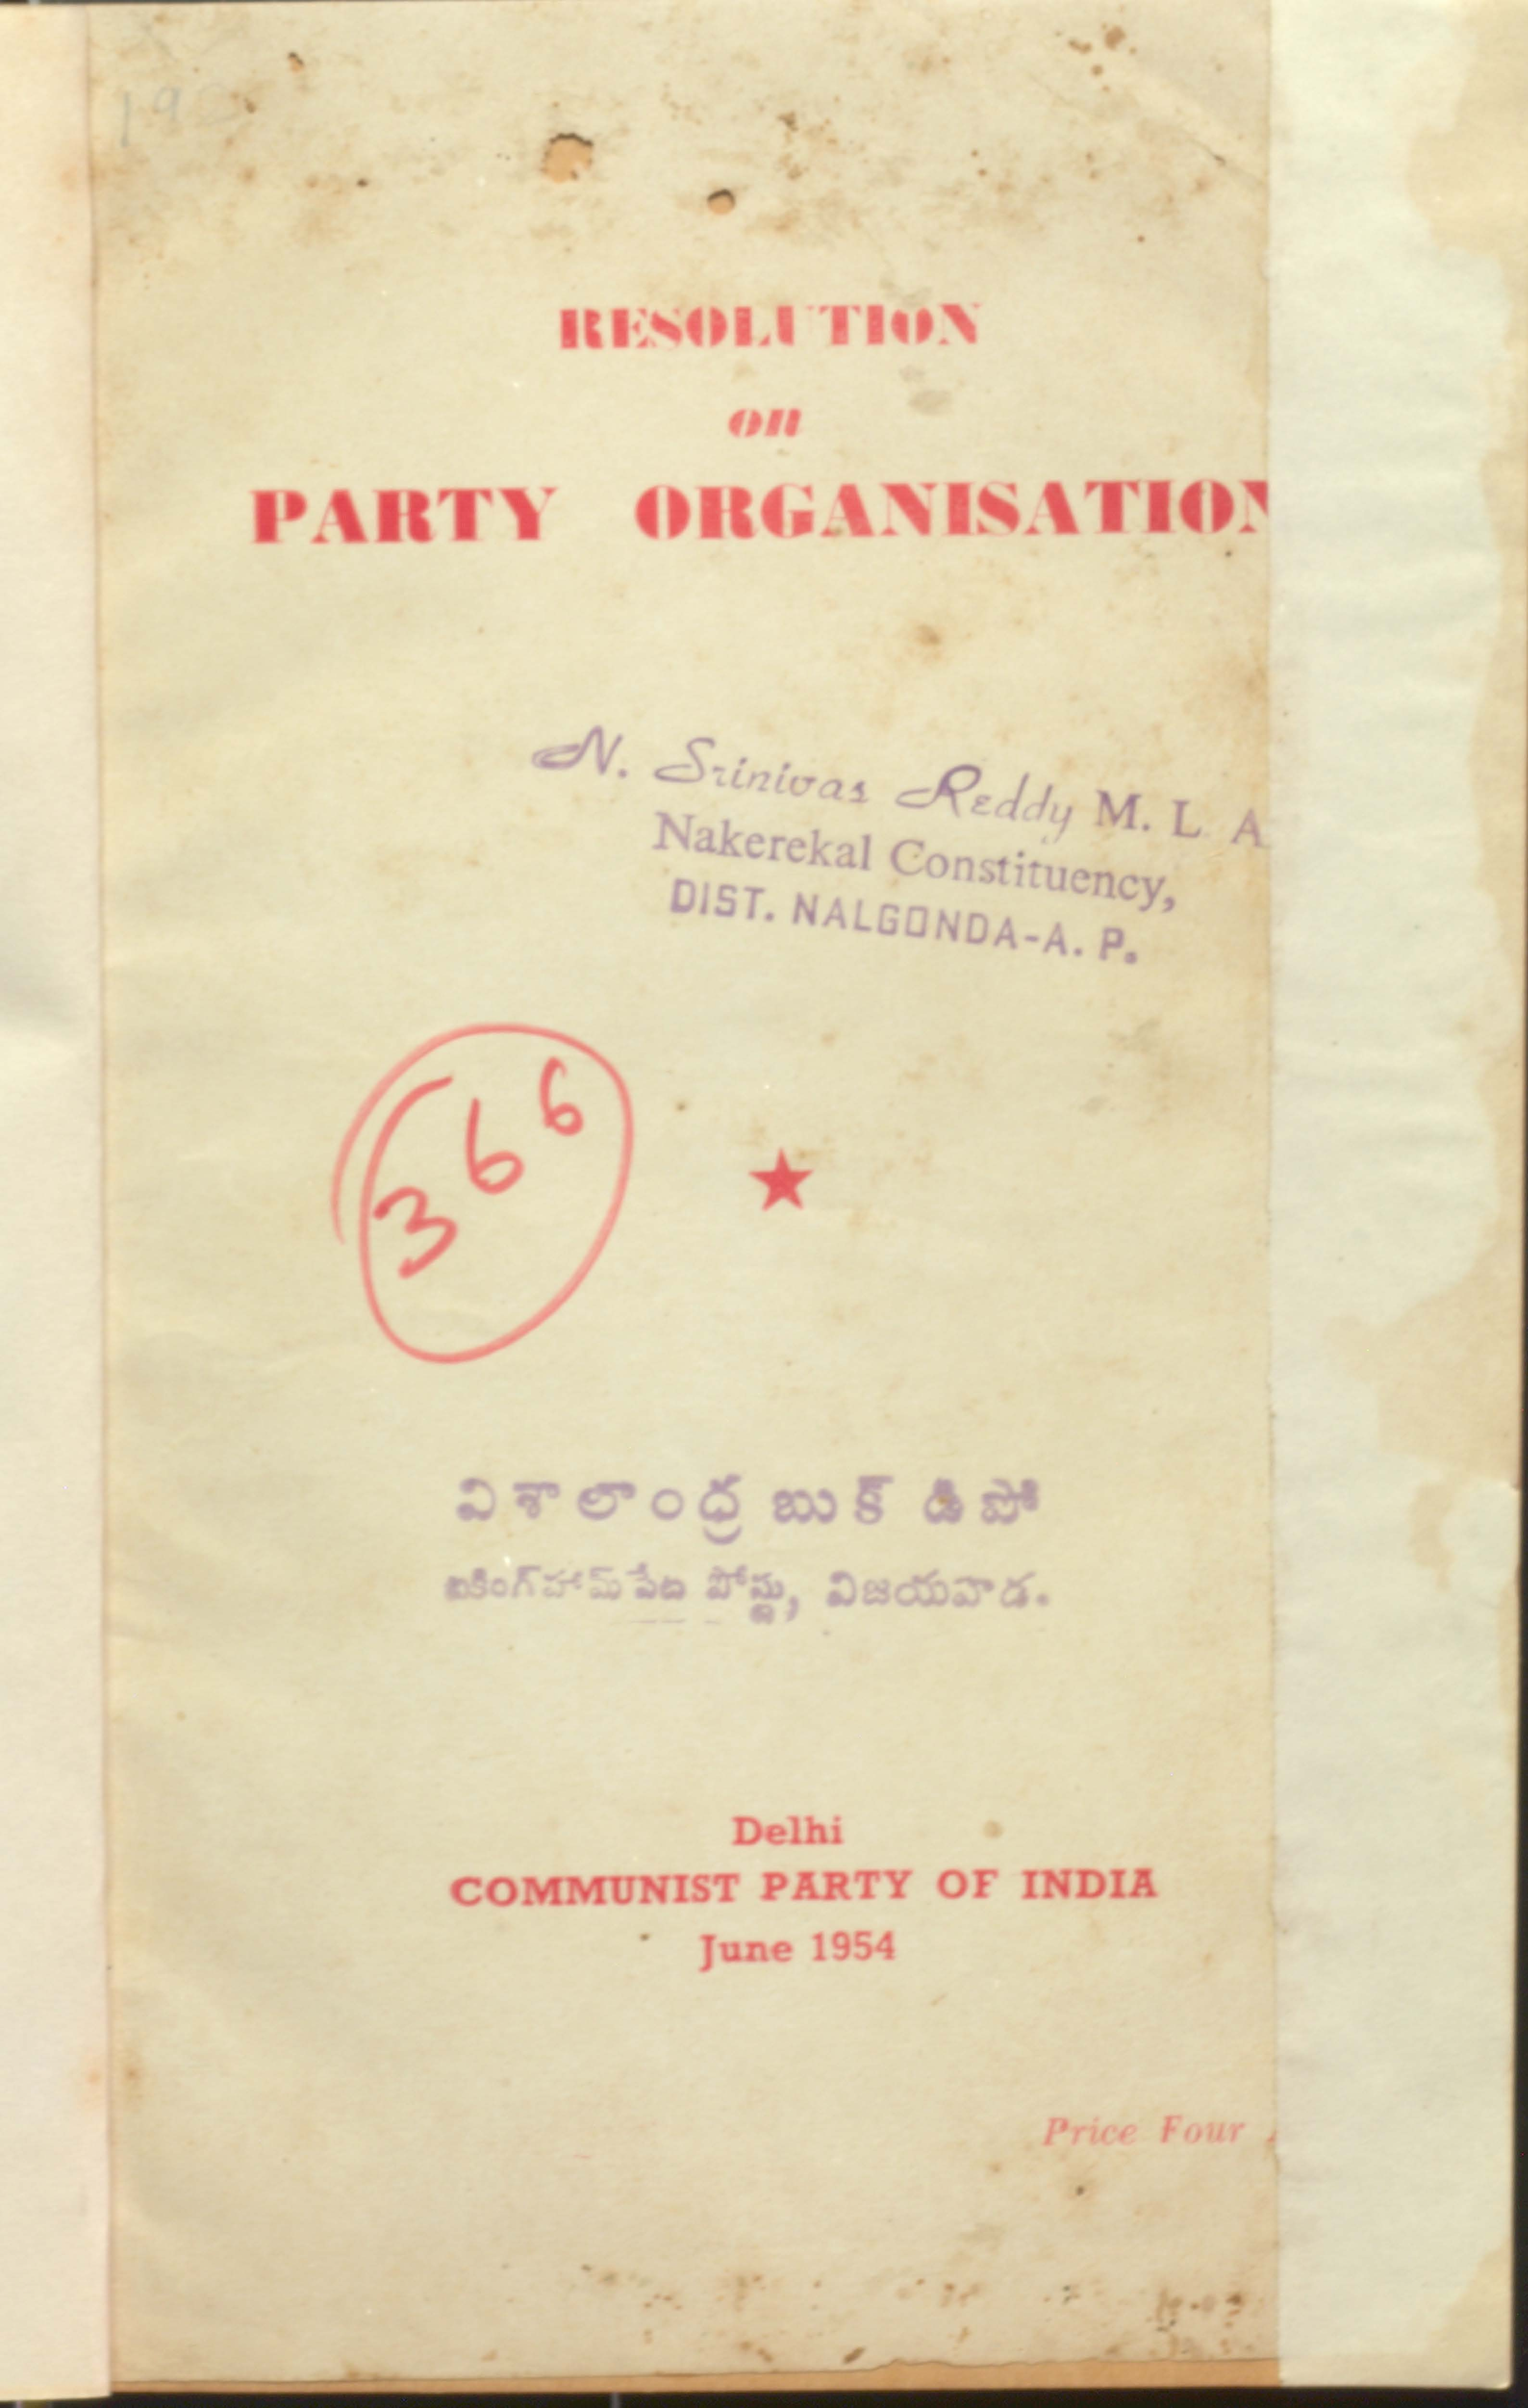 Resolution on party Organisation